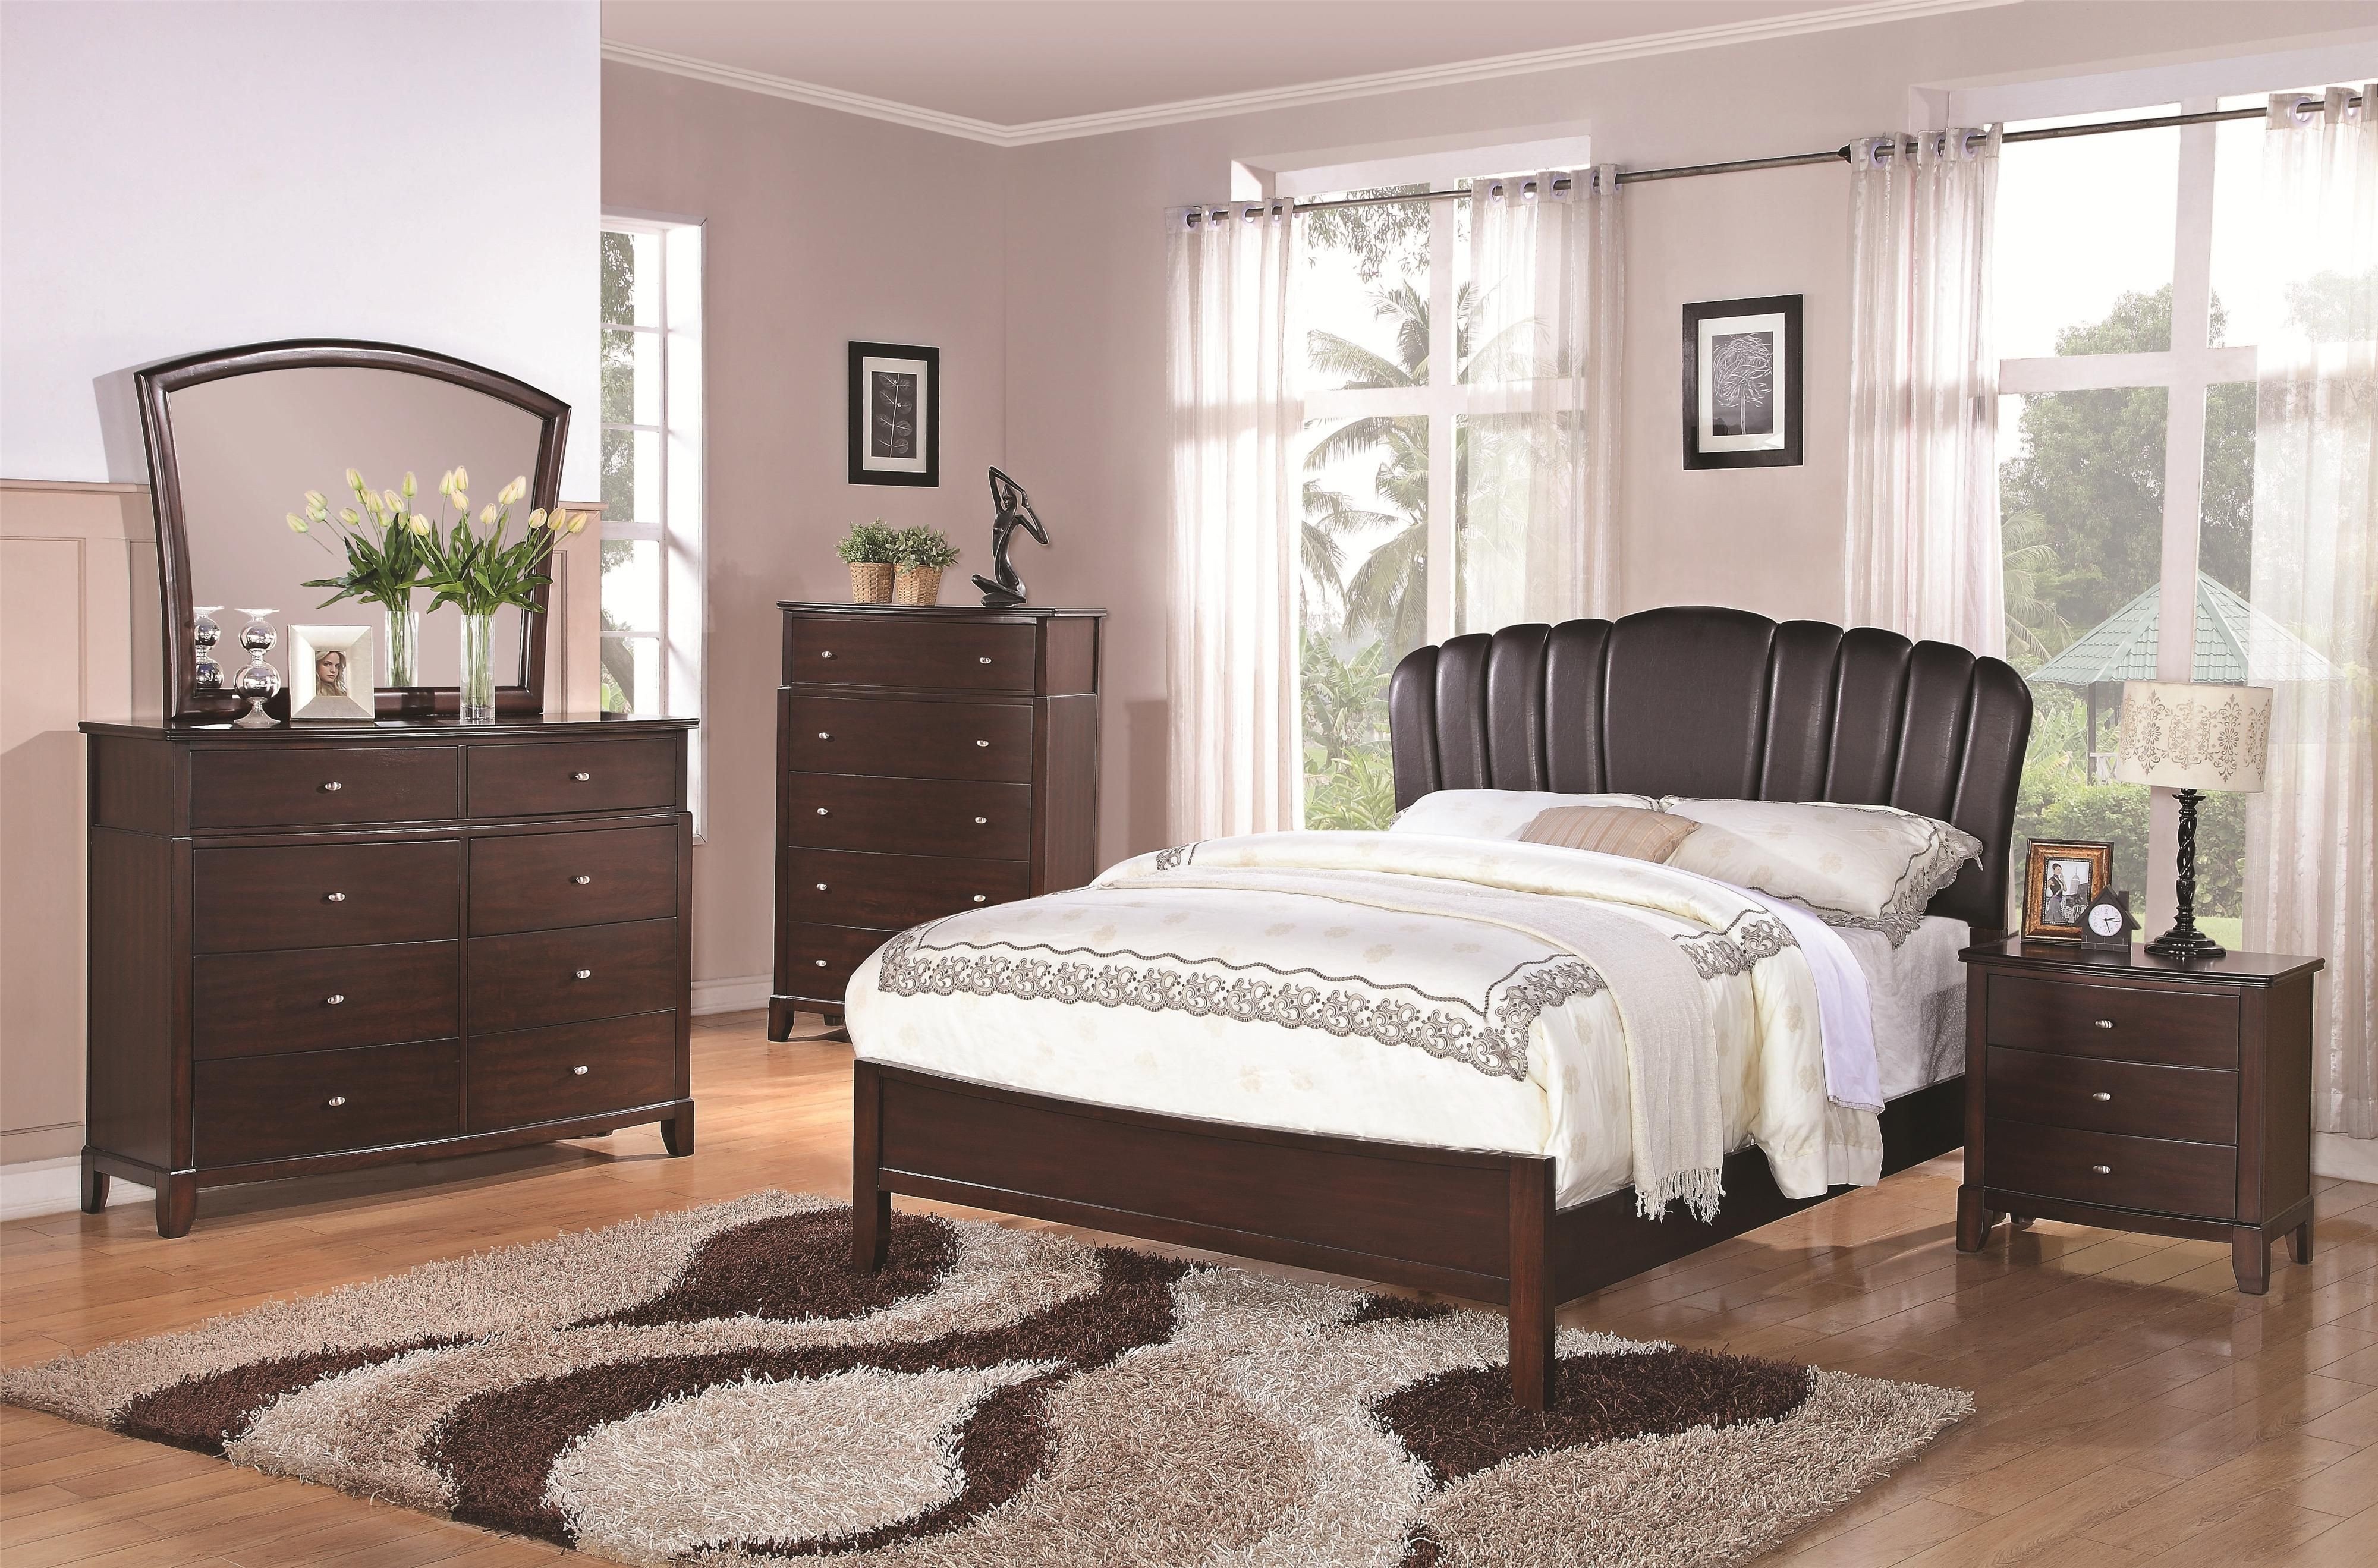 Low Price Bedroom Set Awesome Addley